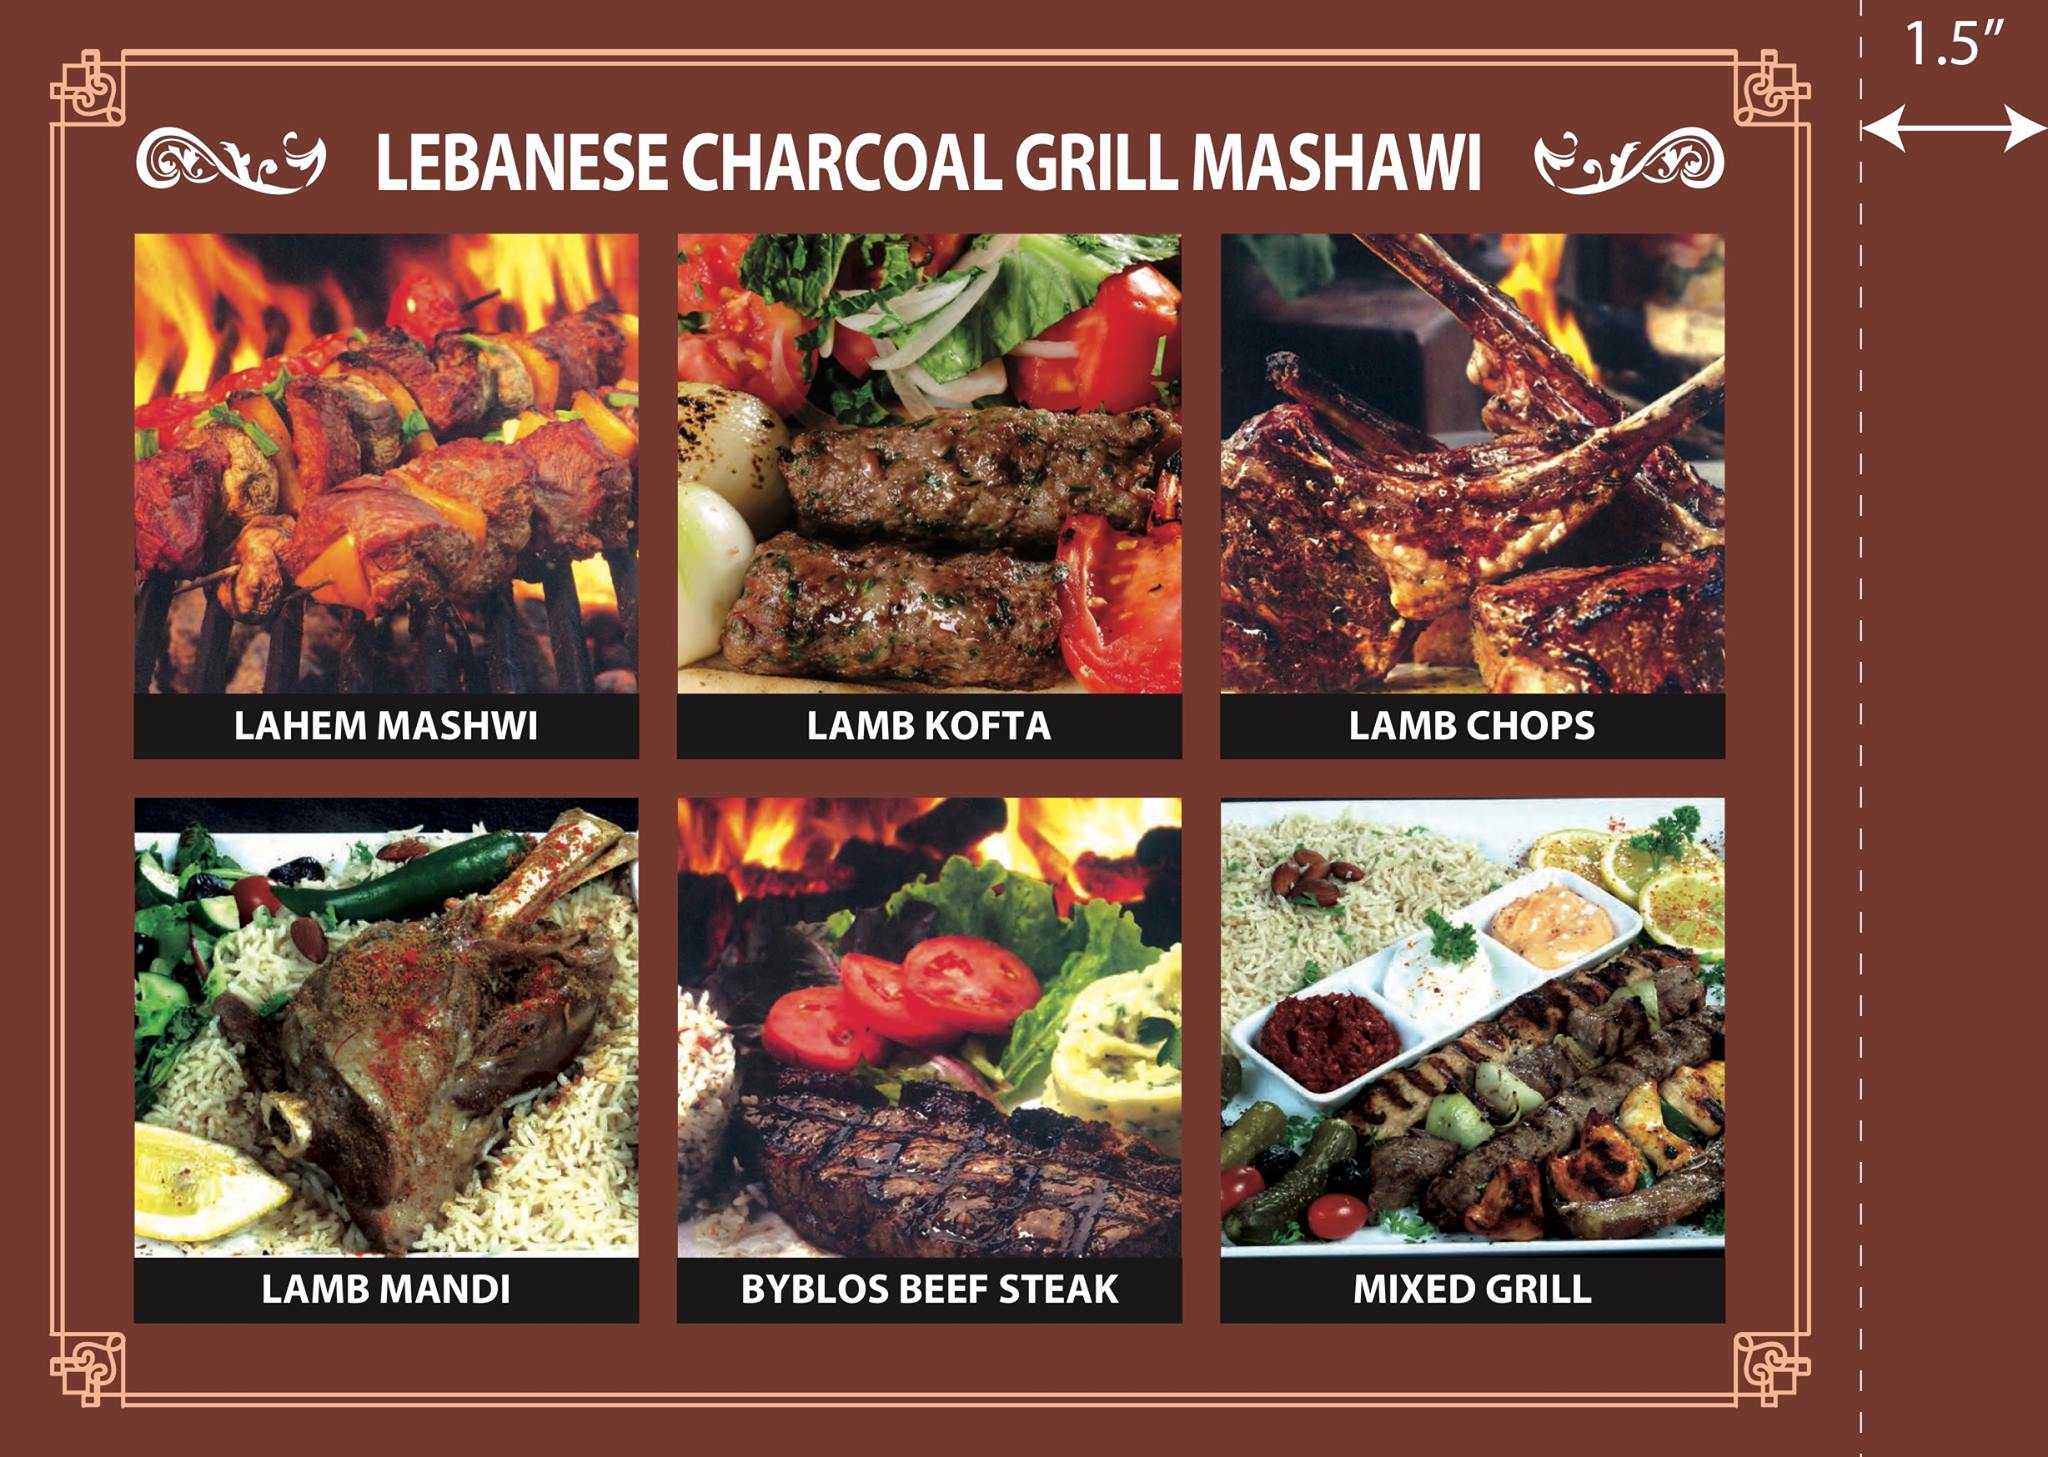 Byblos Grill lebanese charcoal grill Menu